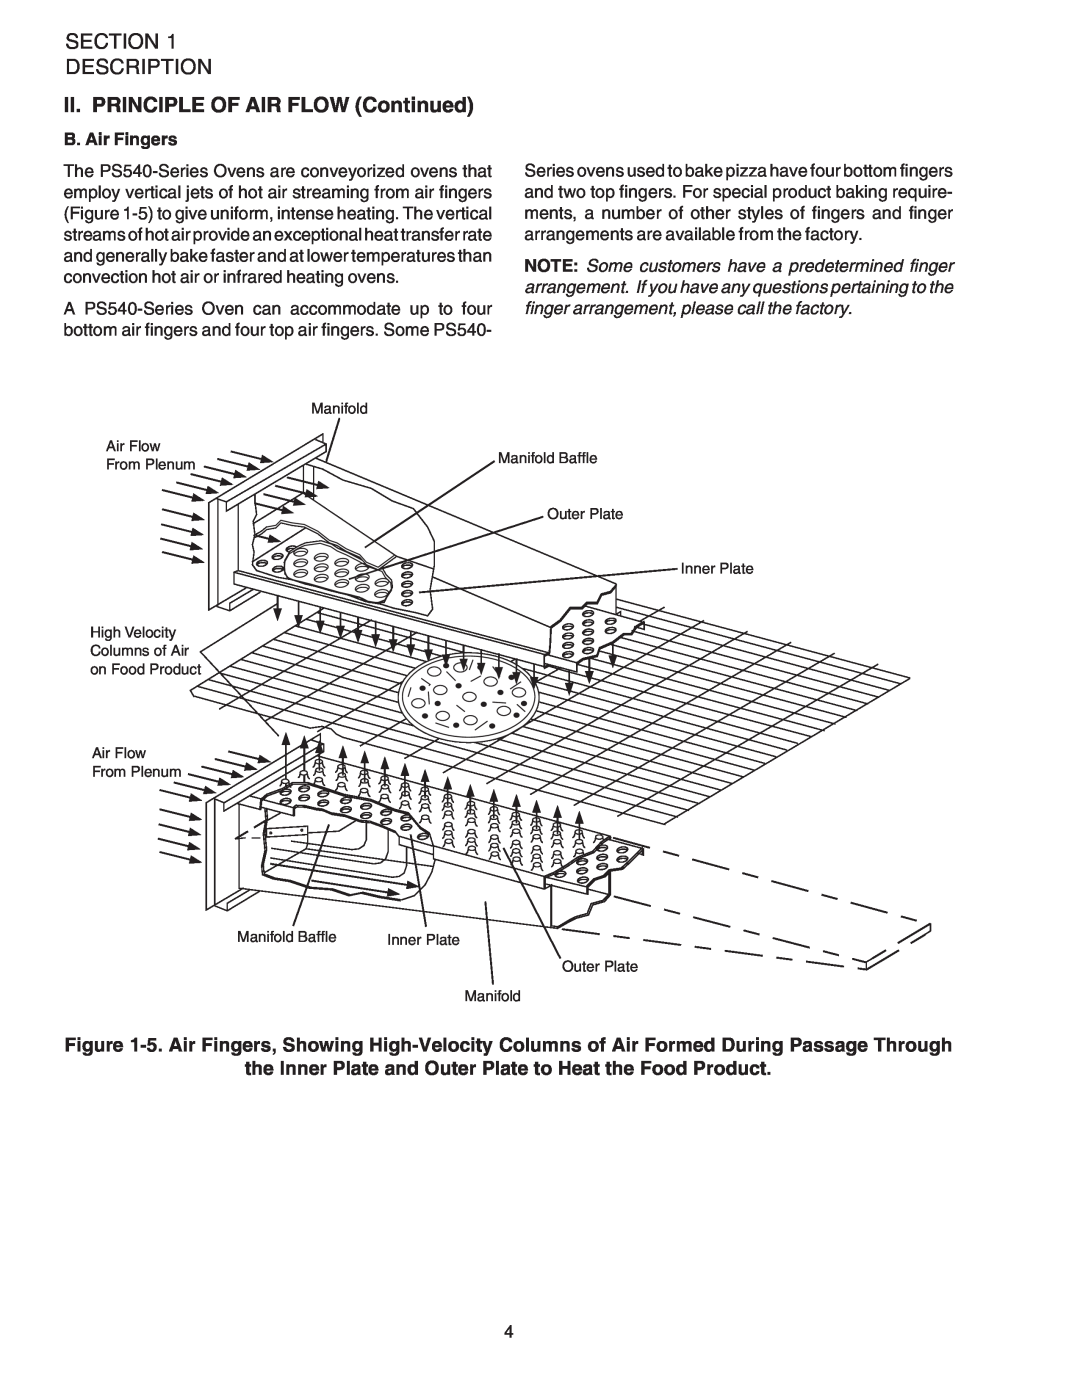 Middleby Marshall PS540G installation manual Section Description, II. PRINCIPLE OF AIR FLOW Continued 